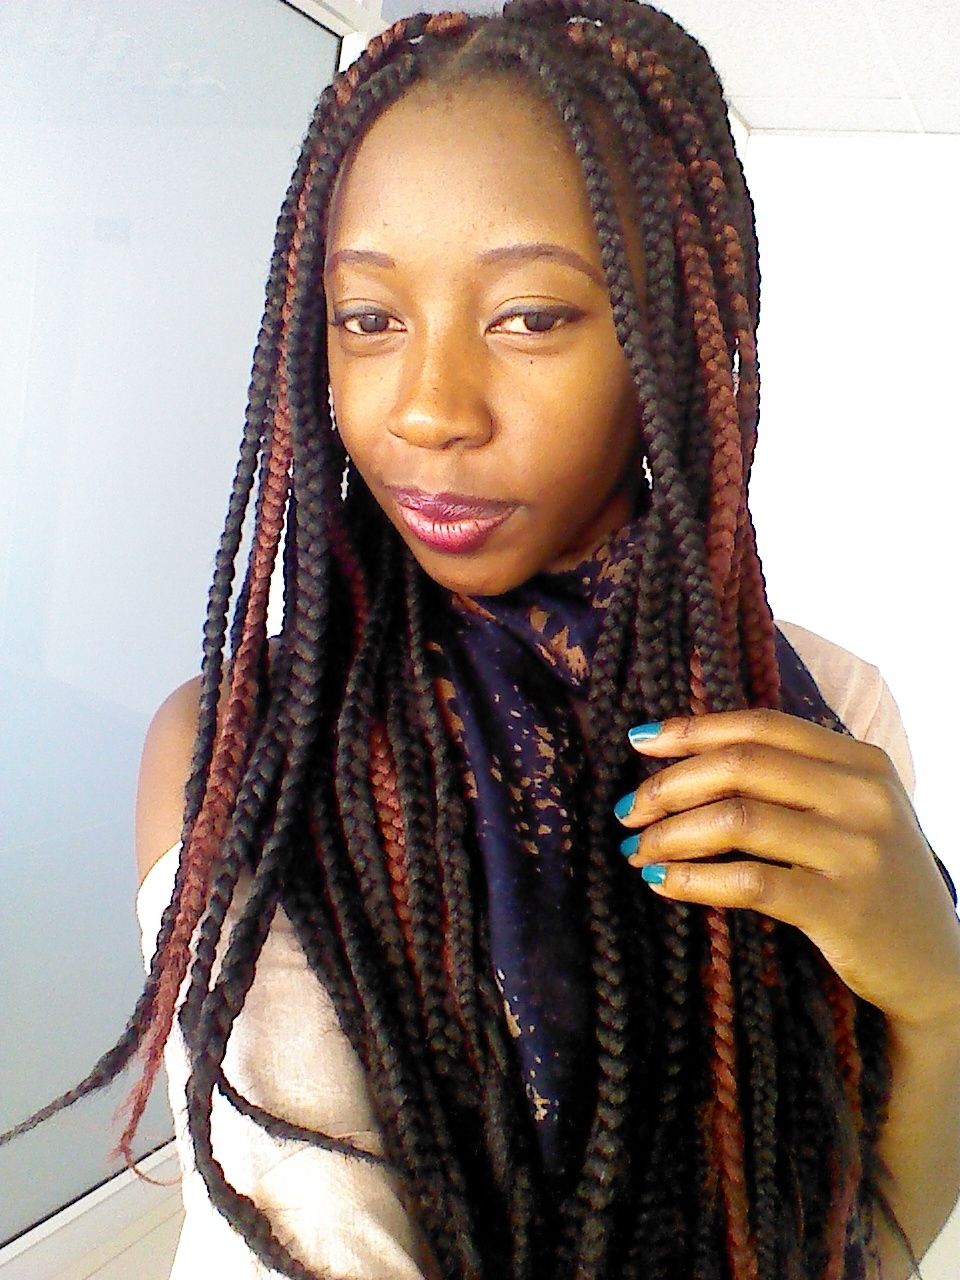 Box Braids And Fake Locs – Soul Hair Throughout Well Liked Braided Hairstyles With Fake Hair (View 1 of 15)